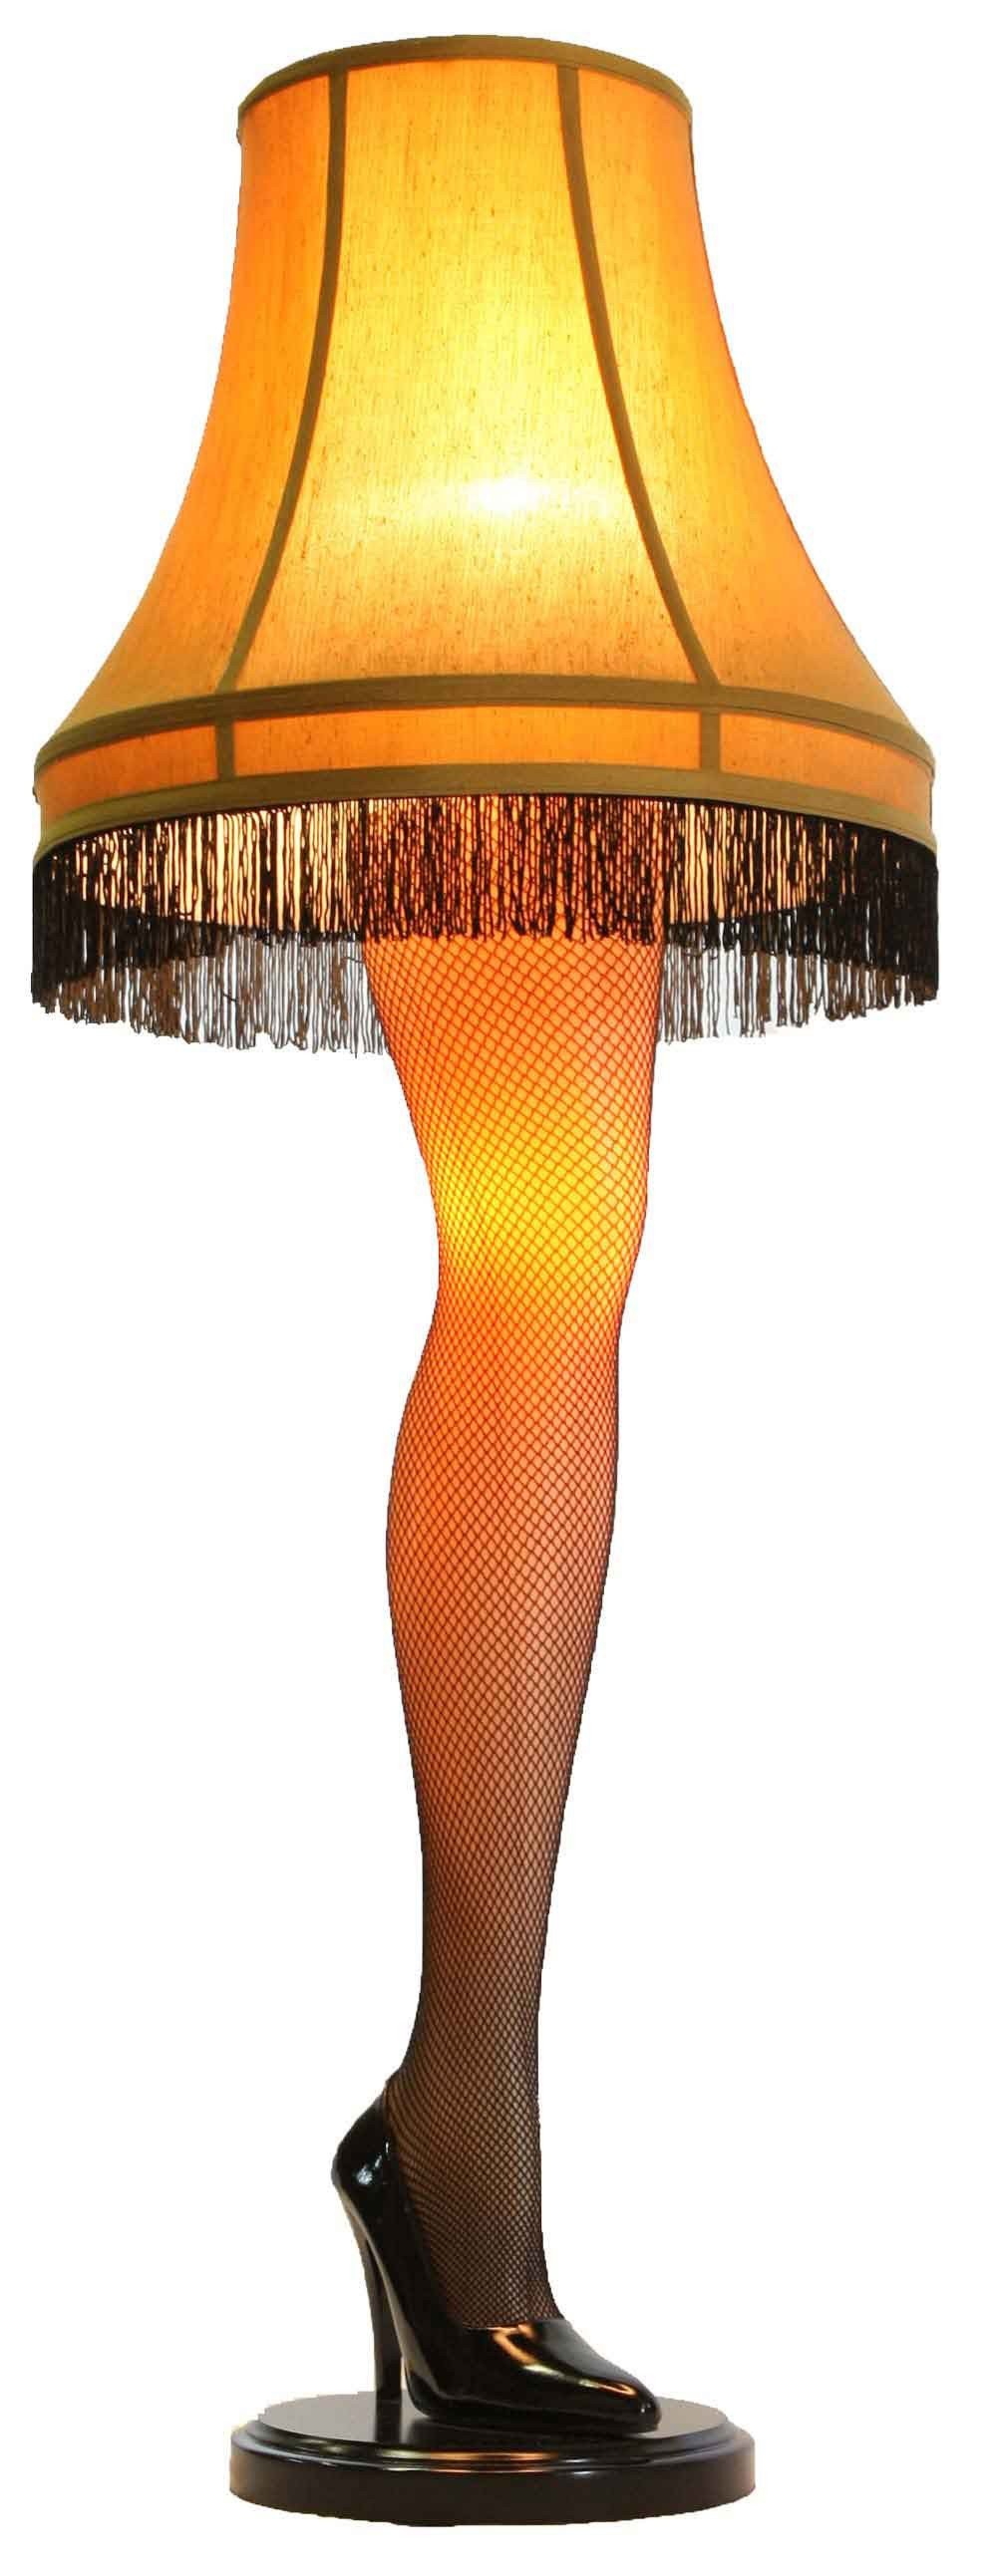 A Christmas Story Lamp Quote
 Movie with leg lamp